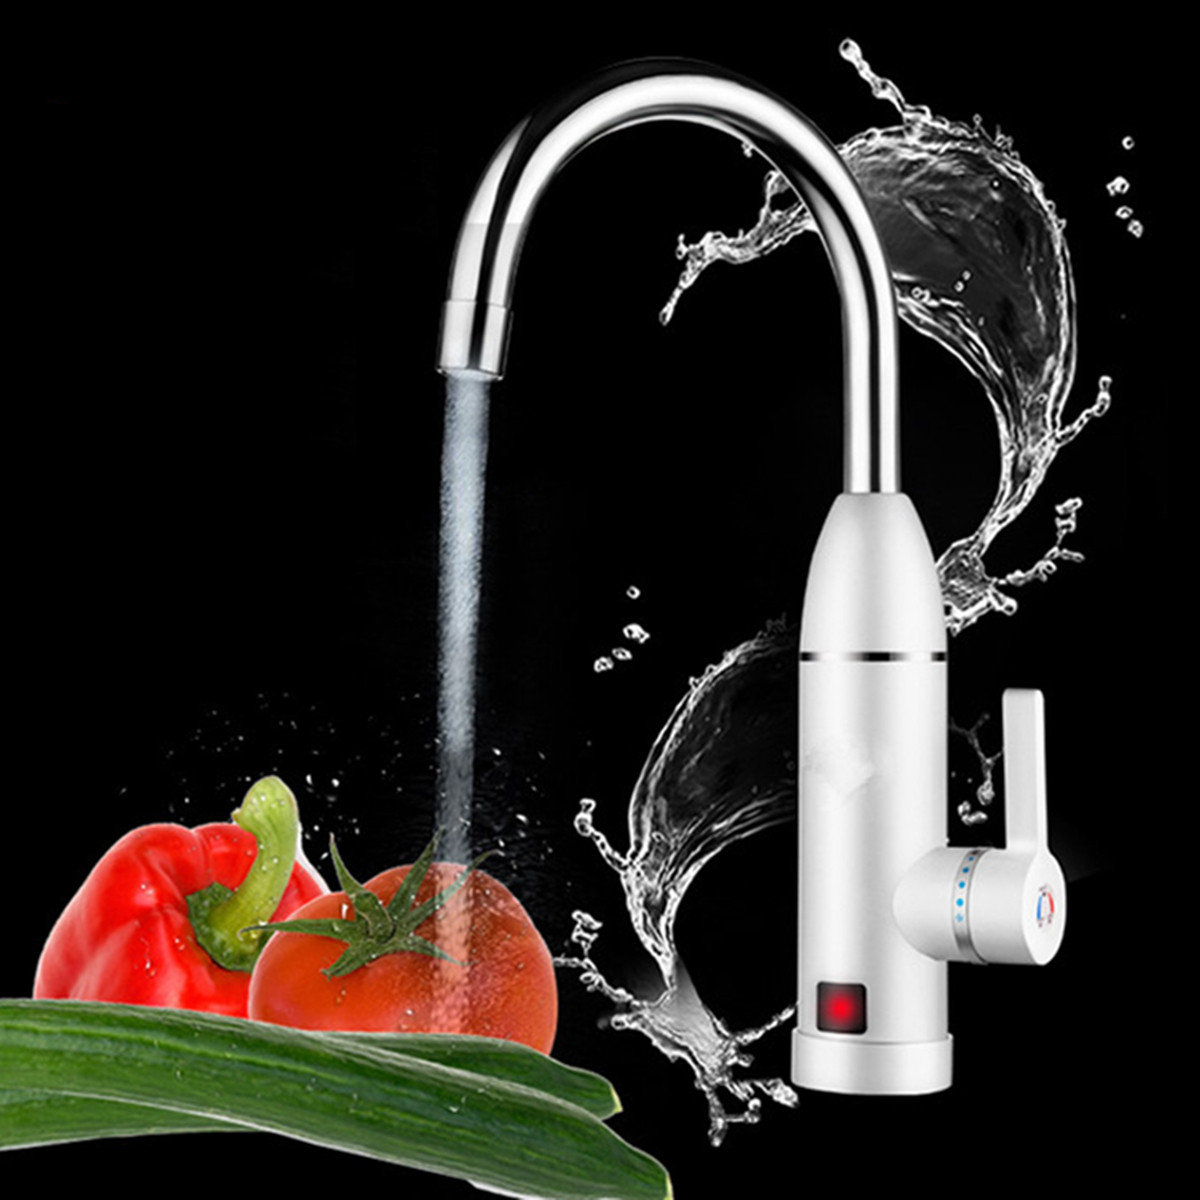 

Tankless Electric Water Heater Faucet Kitchen Heating Hot Cold Water Tap Kitchen Accessories